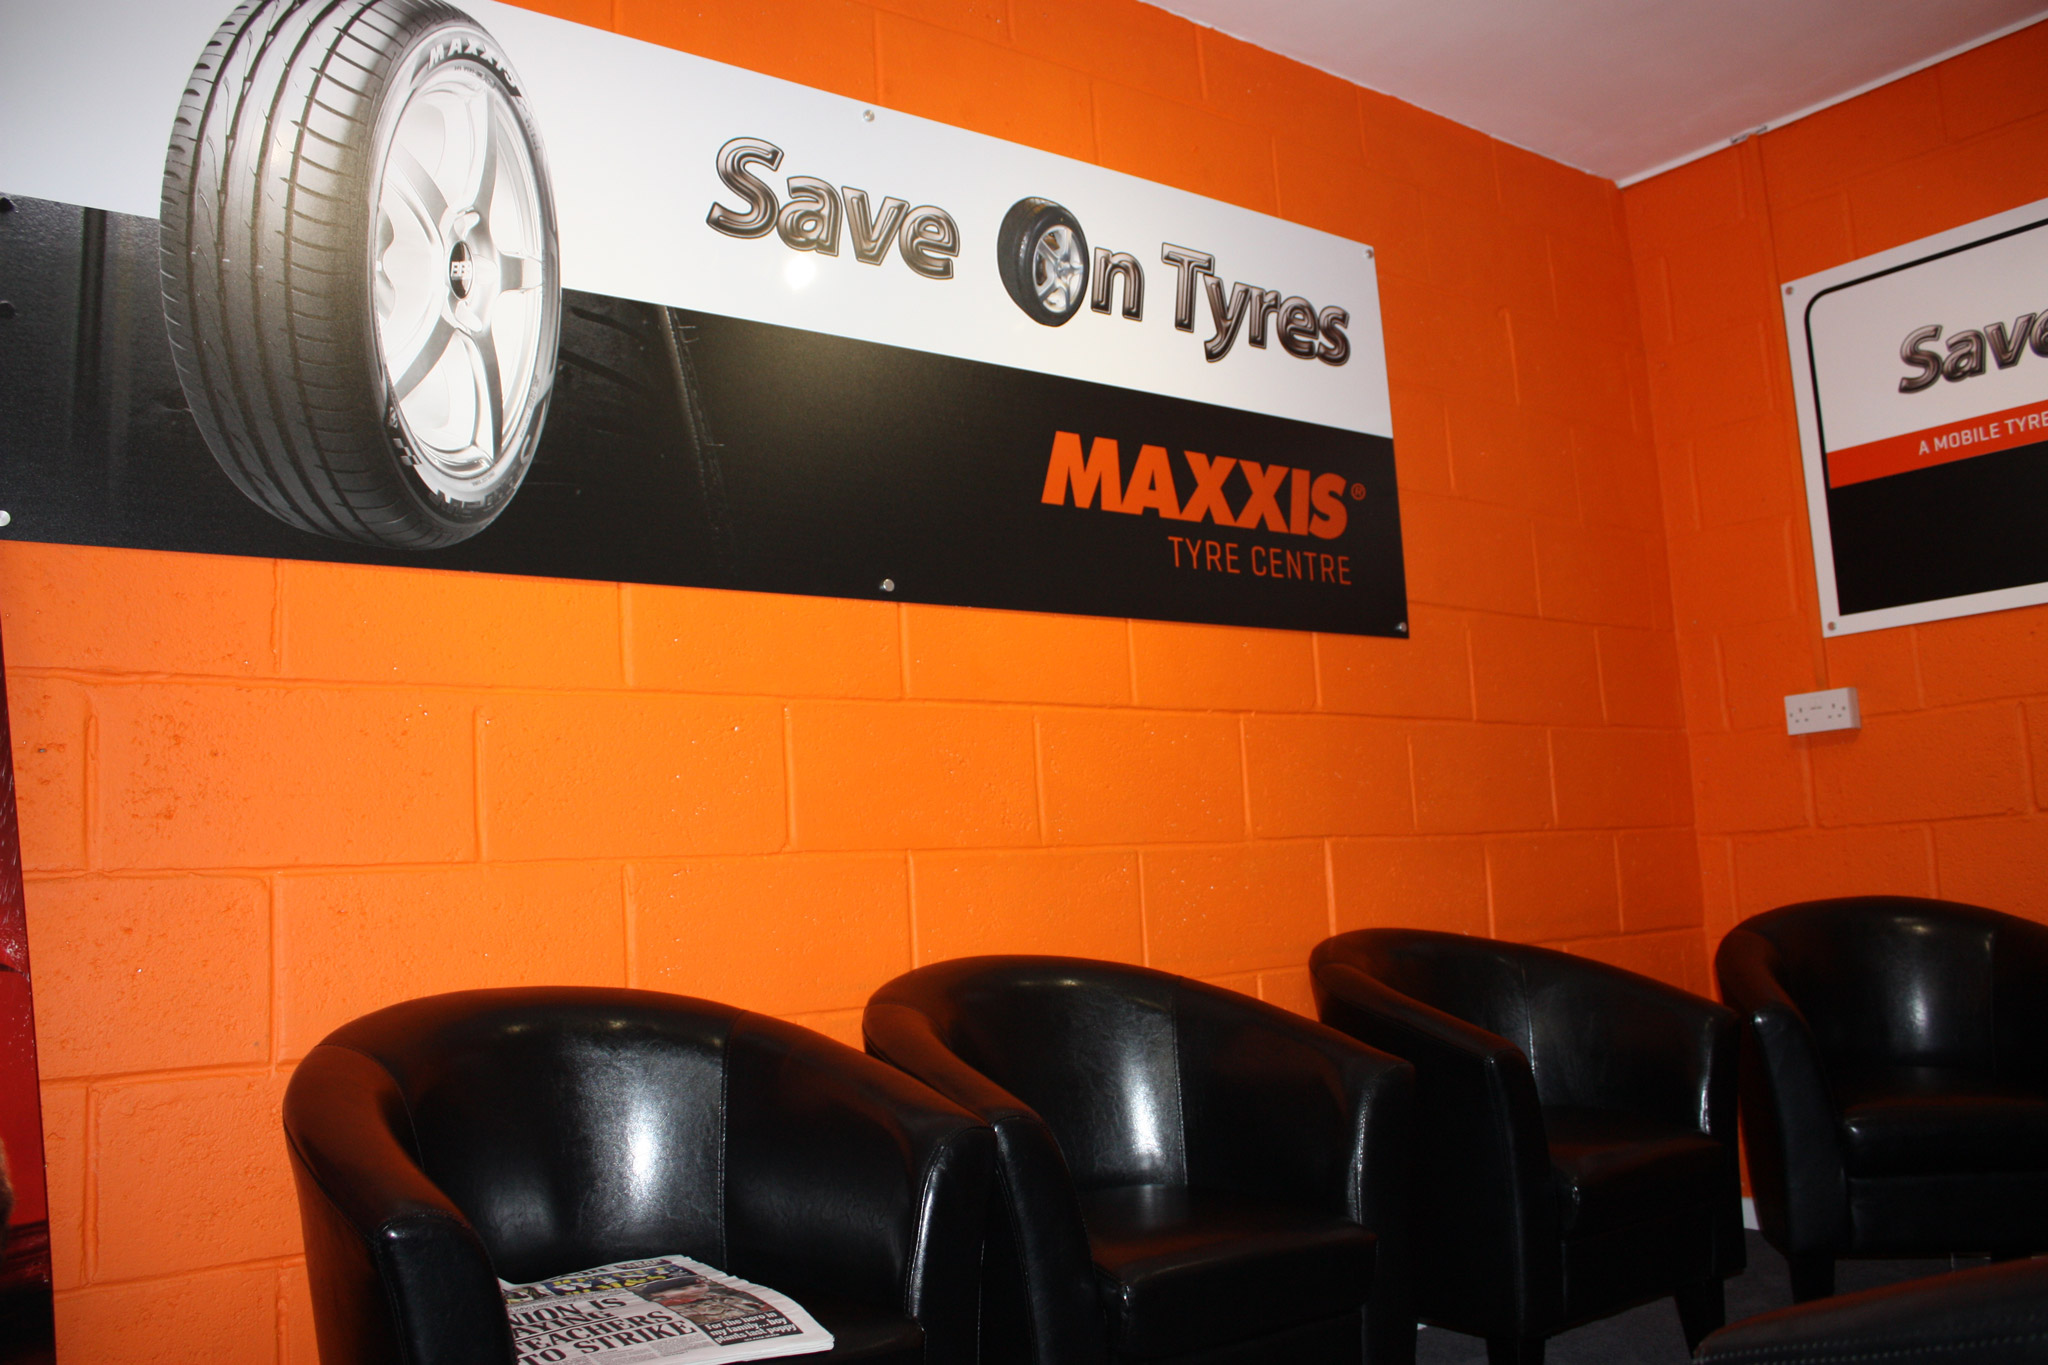 Save on Tyres Gets The Maxxis Treatment